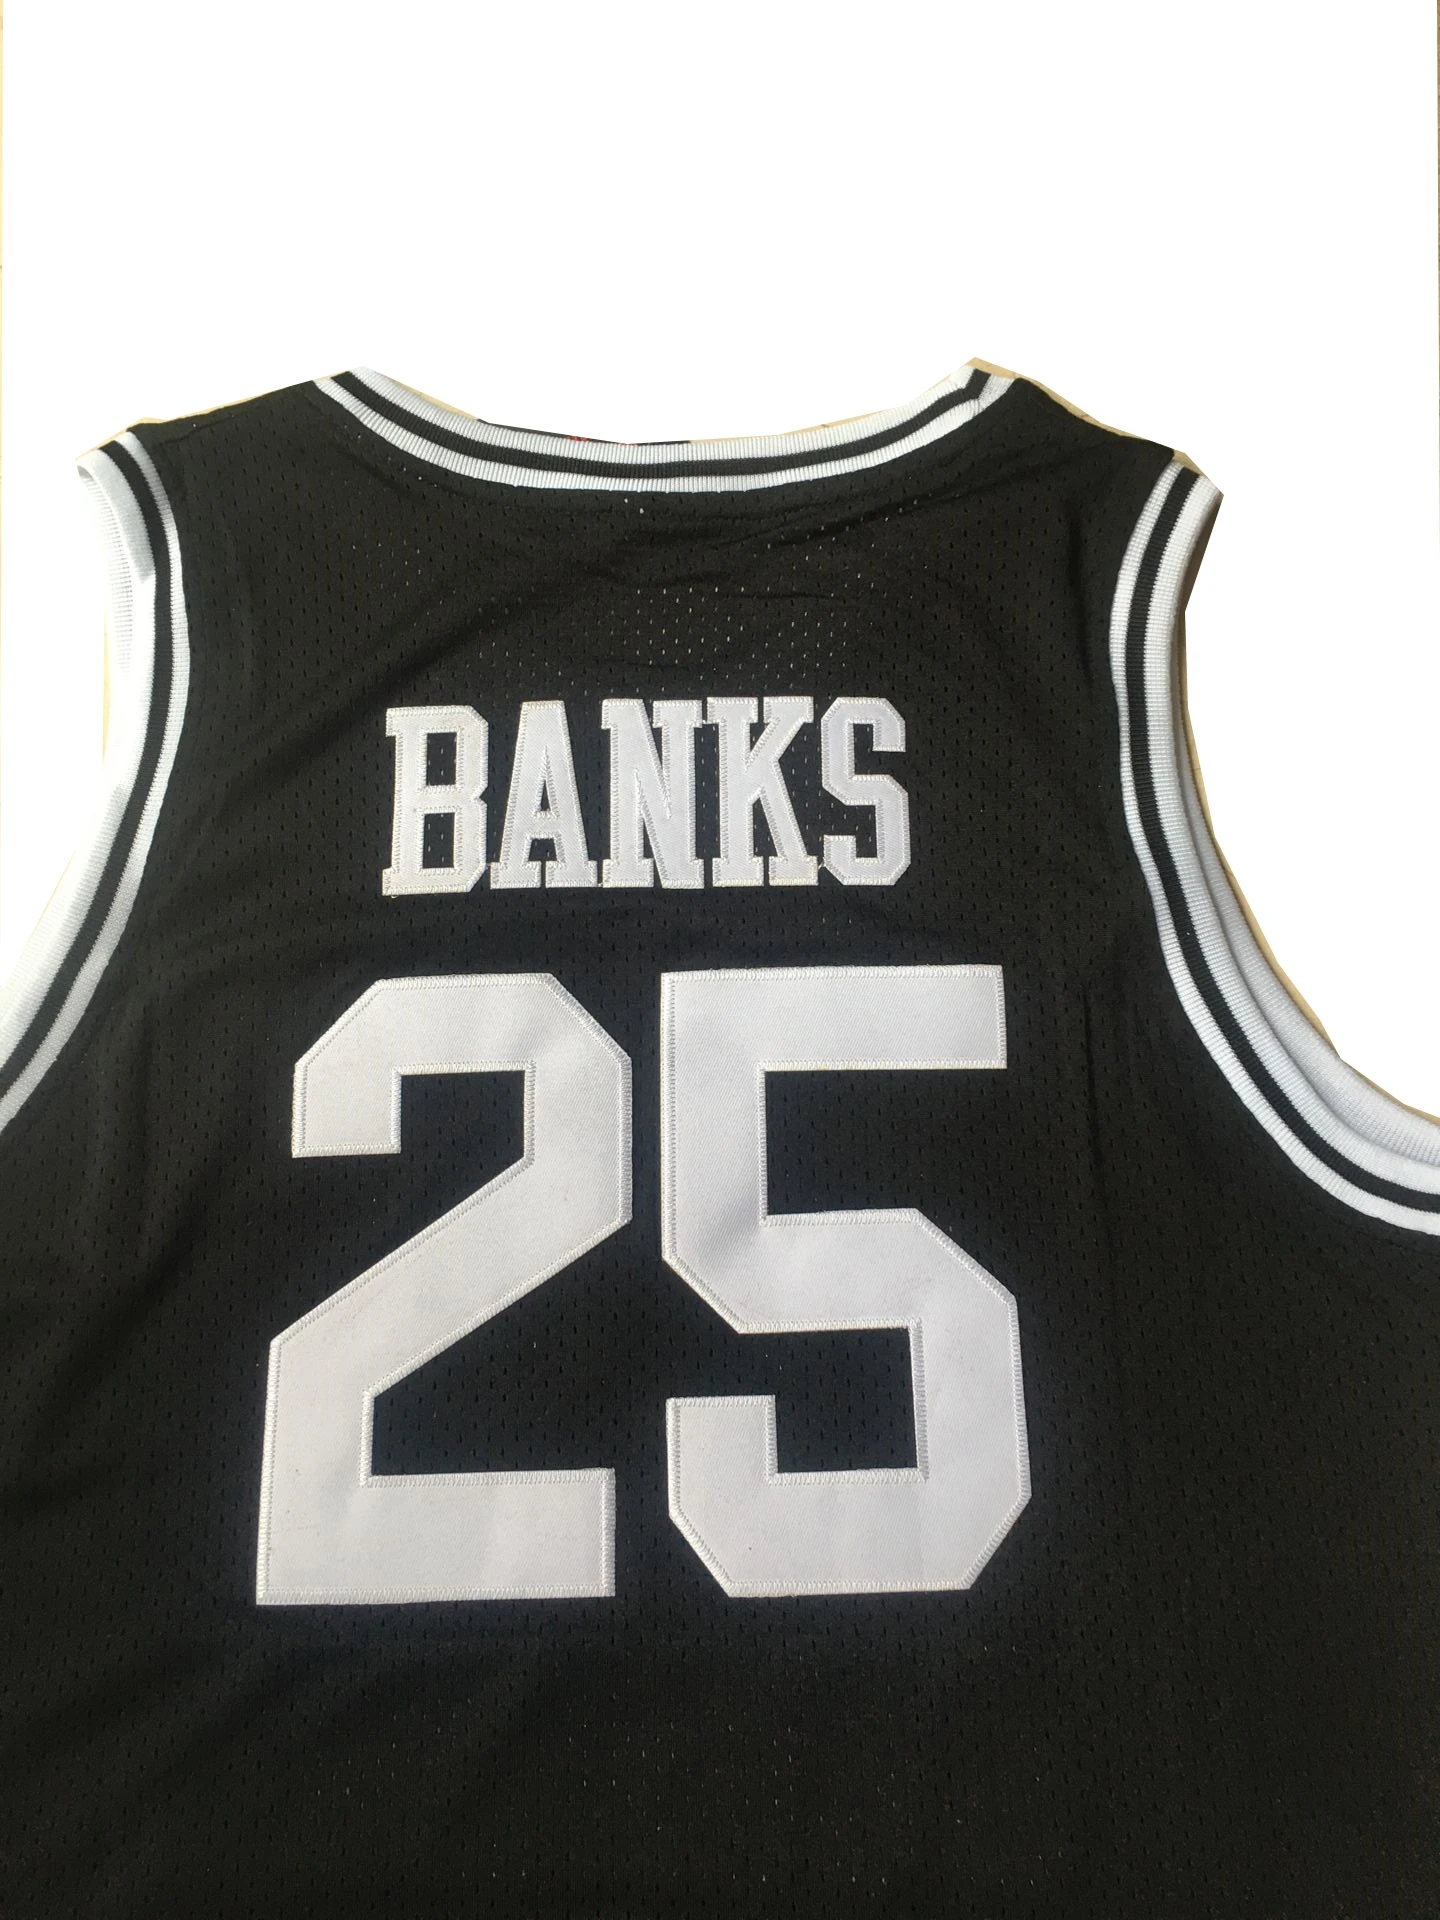 

BG basketball jerseys BEL-AIR ACADEMY 25 BANKS jersey Embroidery sewing Outdoor sportswear Hip-hop culture movie black yellow